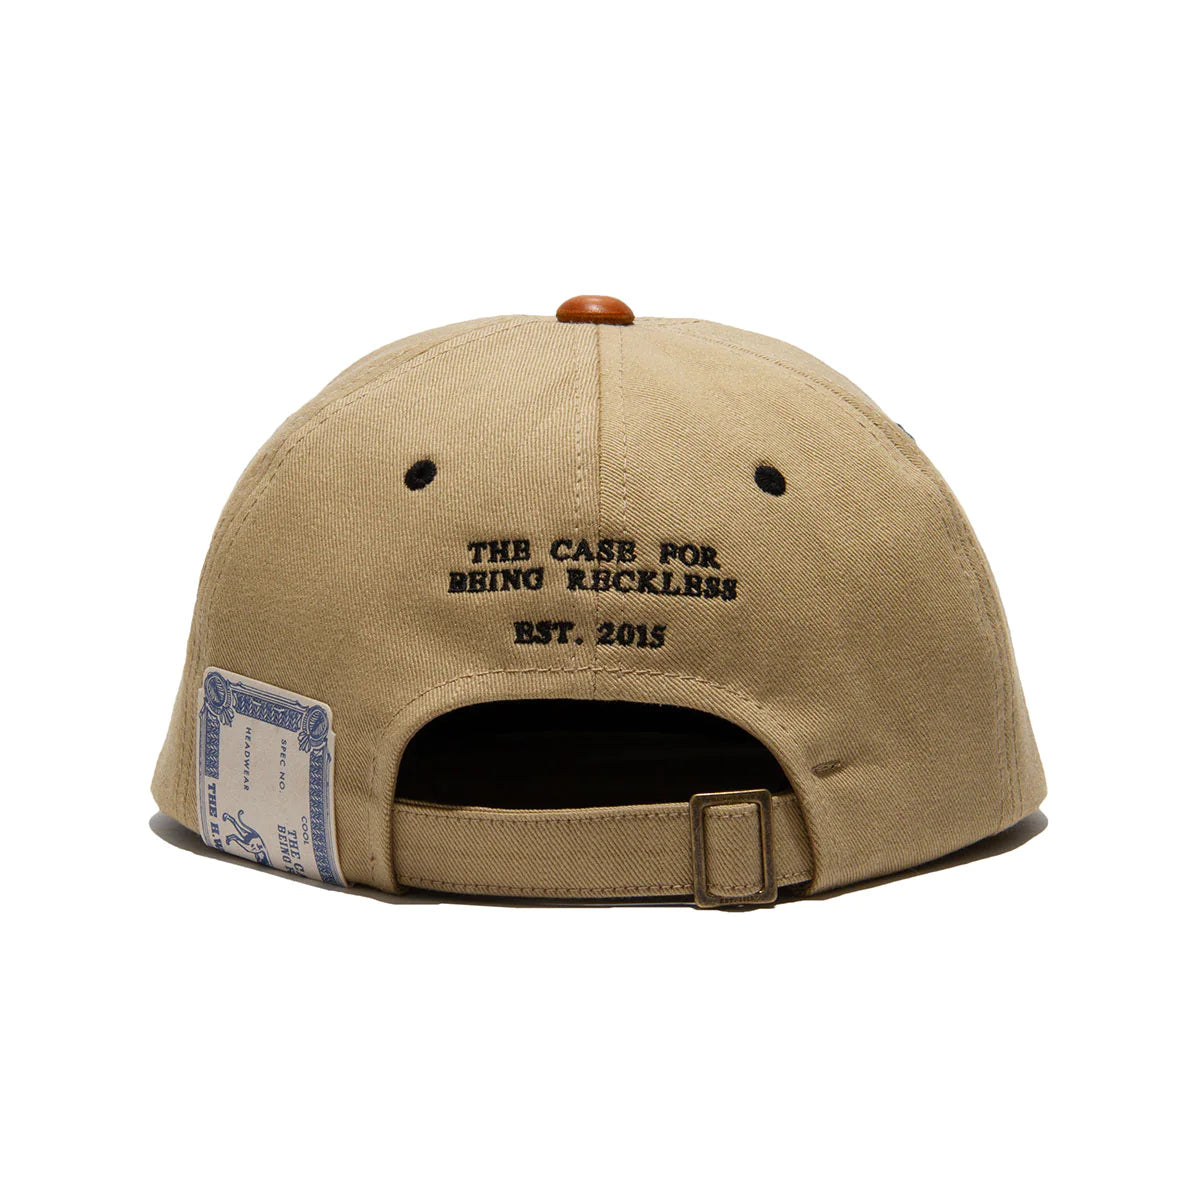 The H.W. Dog & Co - 2 TONE LEATHER COTTON CAP - Beige